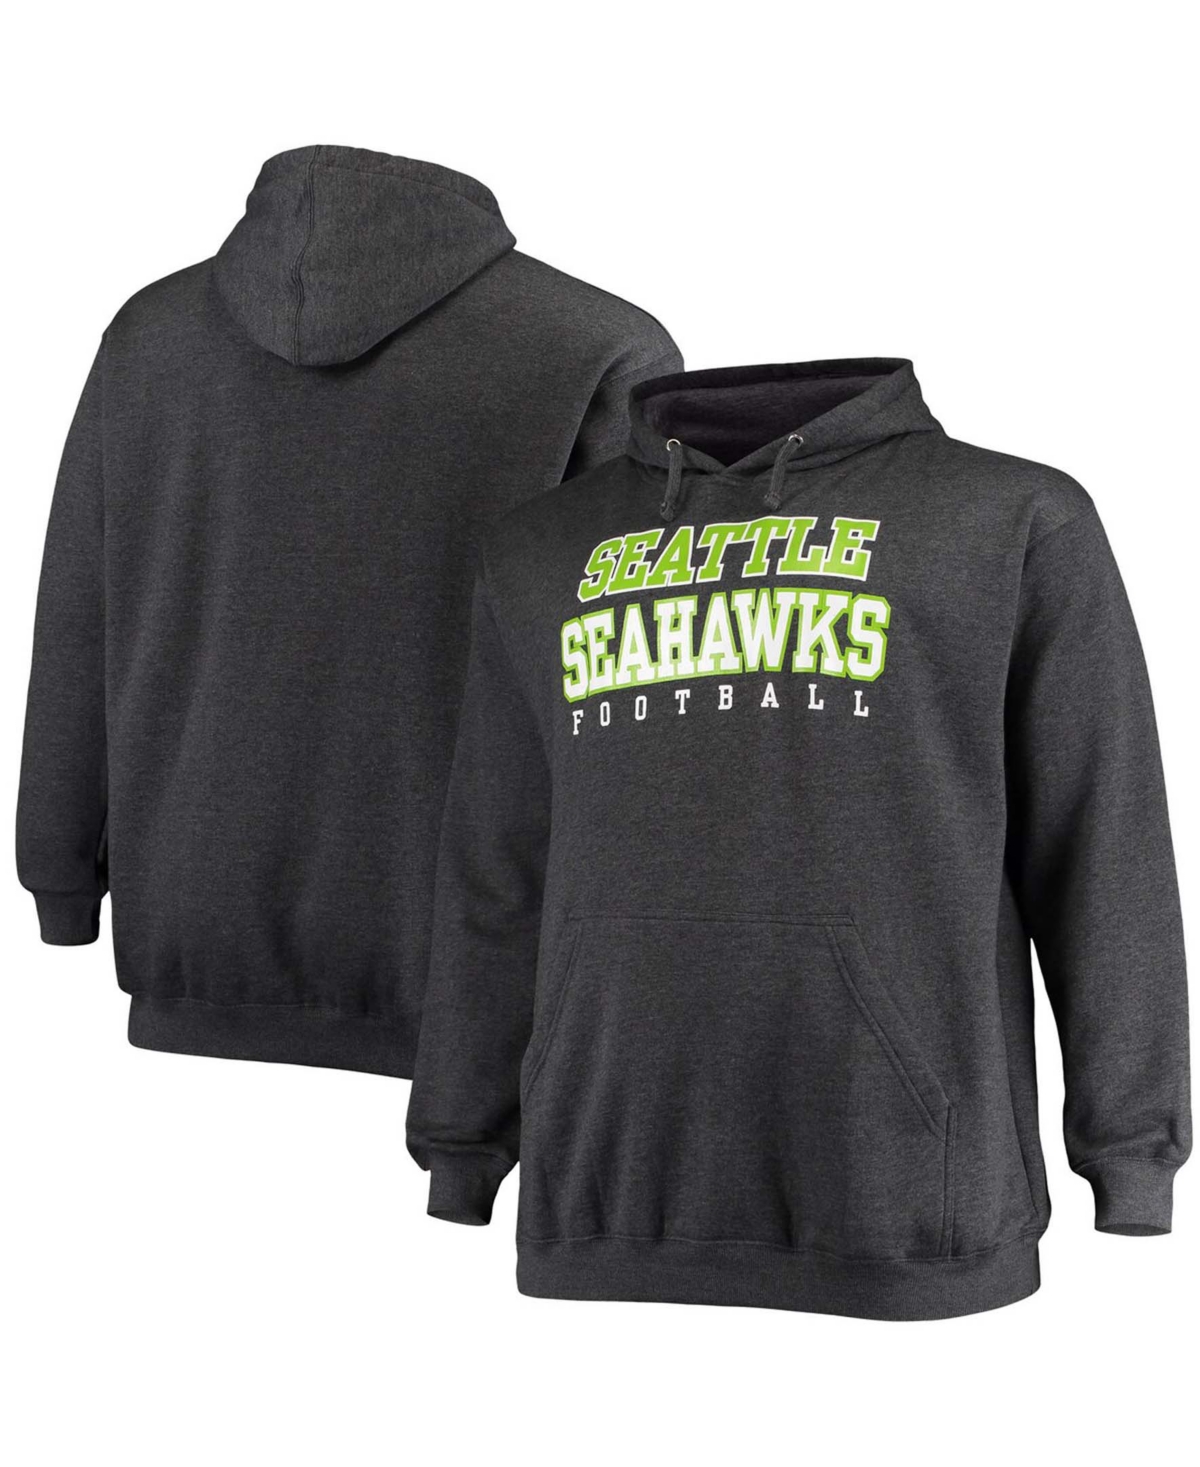 Men's Big and Tall Heathered Charcoal Seattle Seahawks Practice Pullover Hoodie - Heather Charcoal